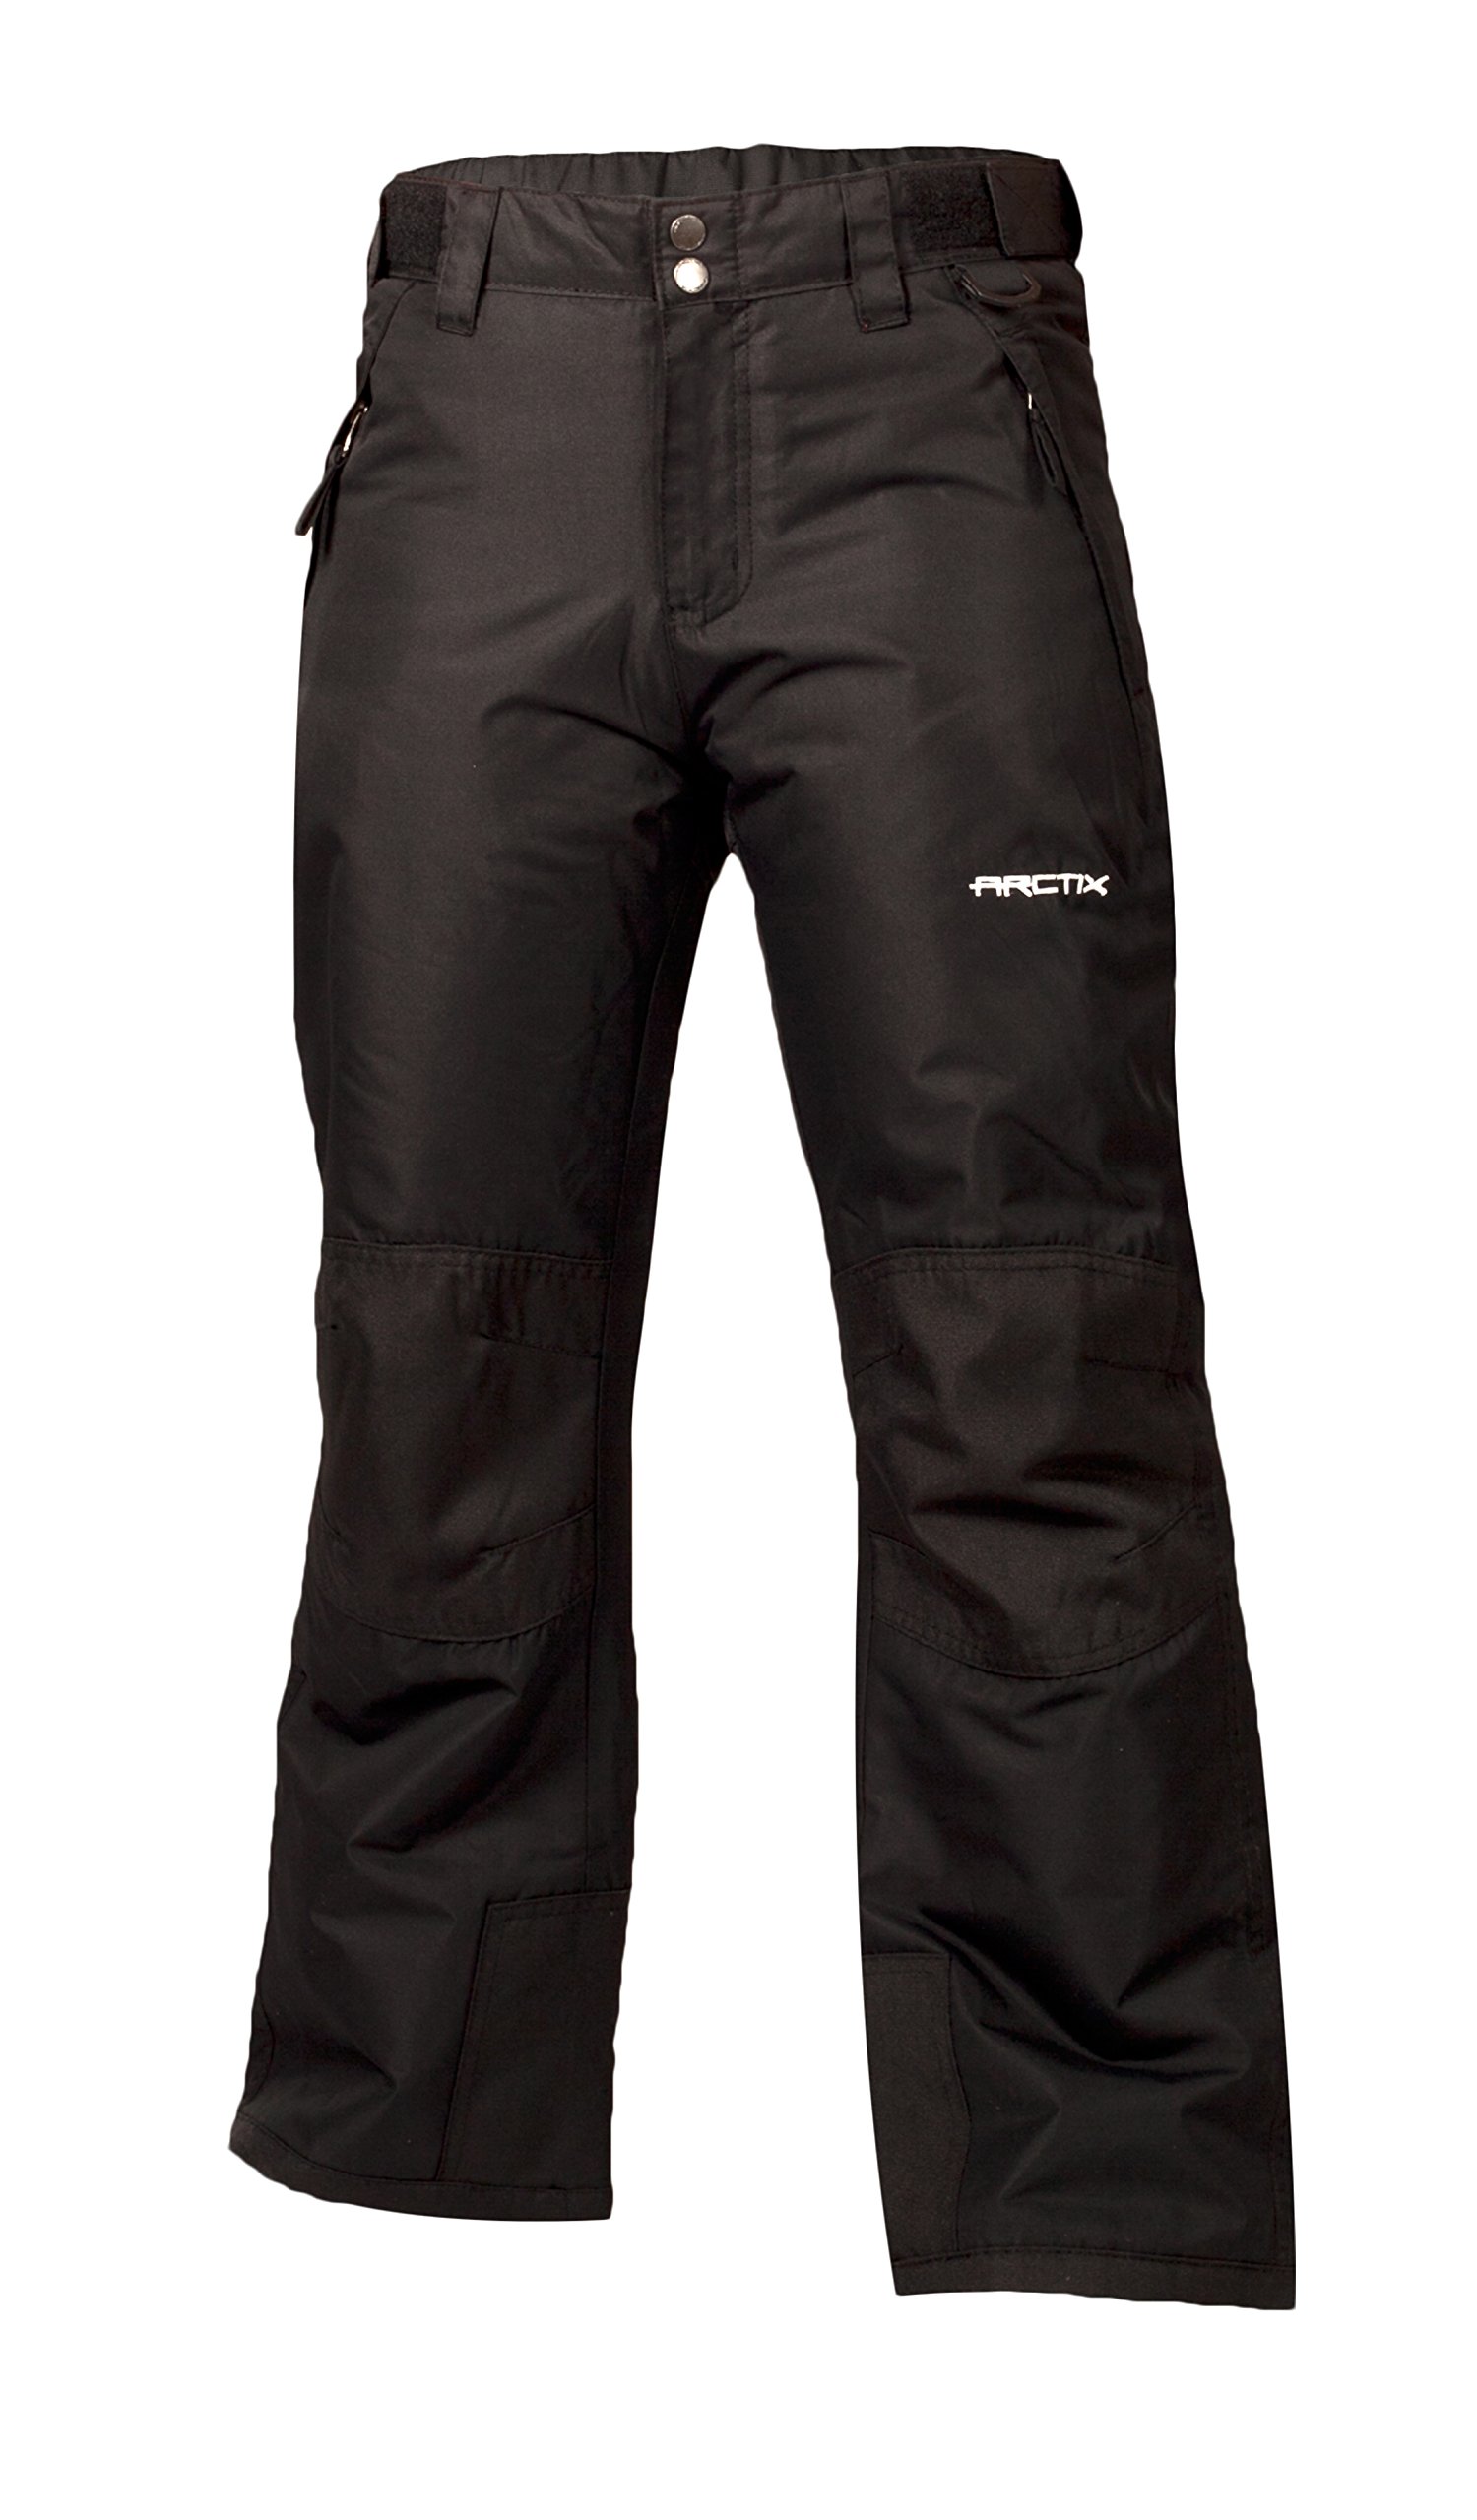 SkiGear unisex-child Snow Pants With Reinforced Knees and Seat